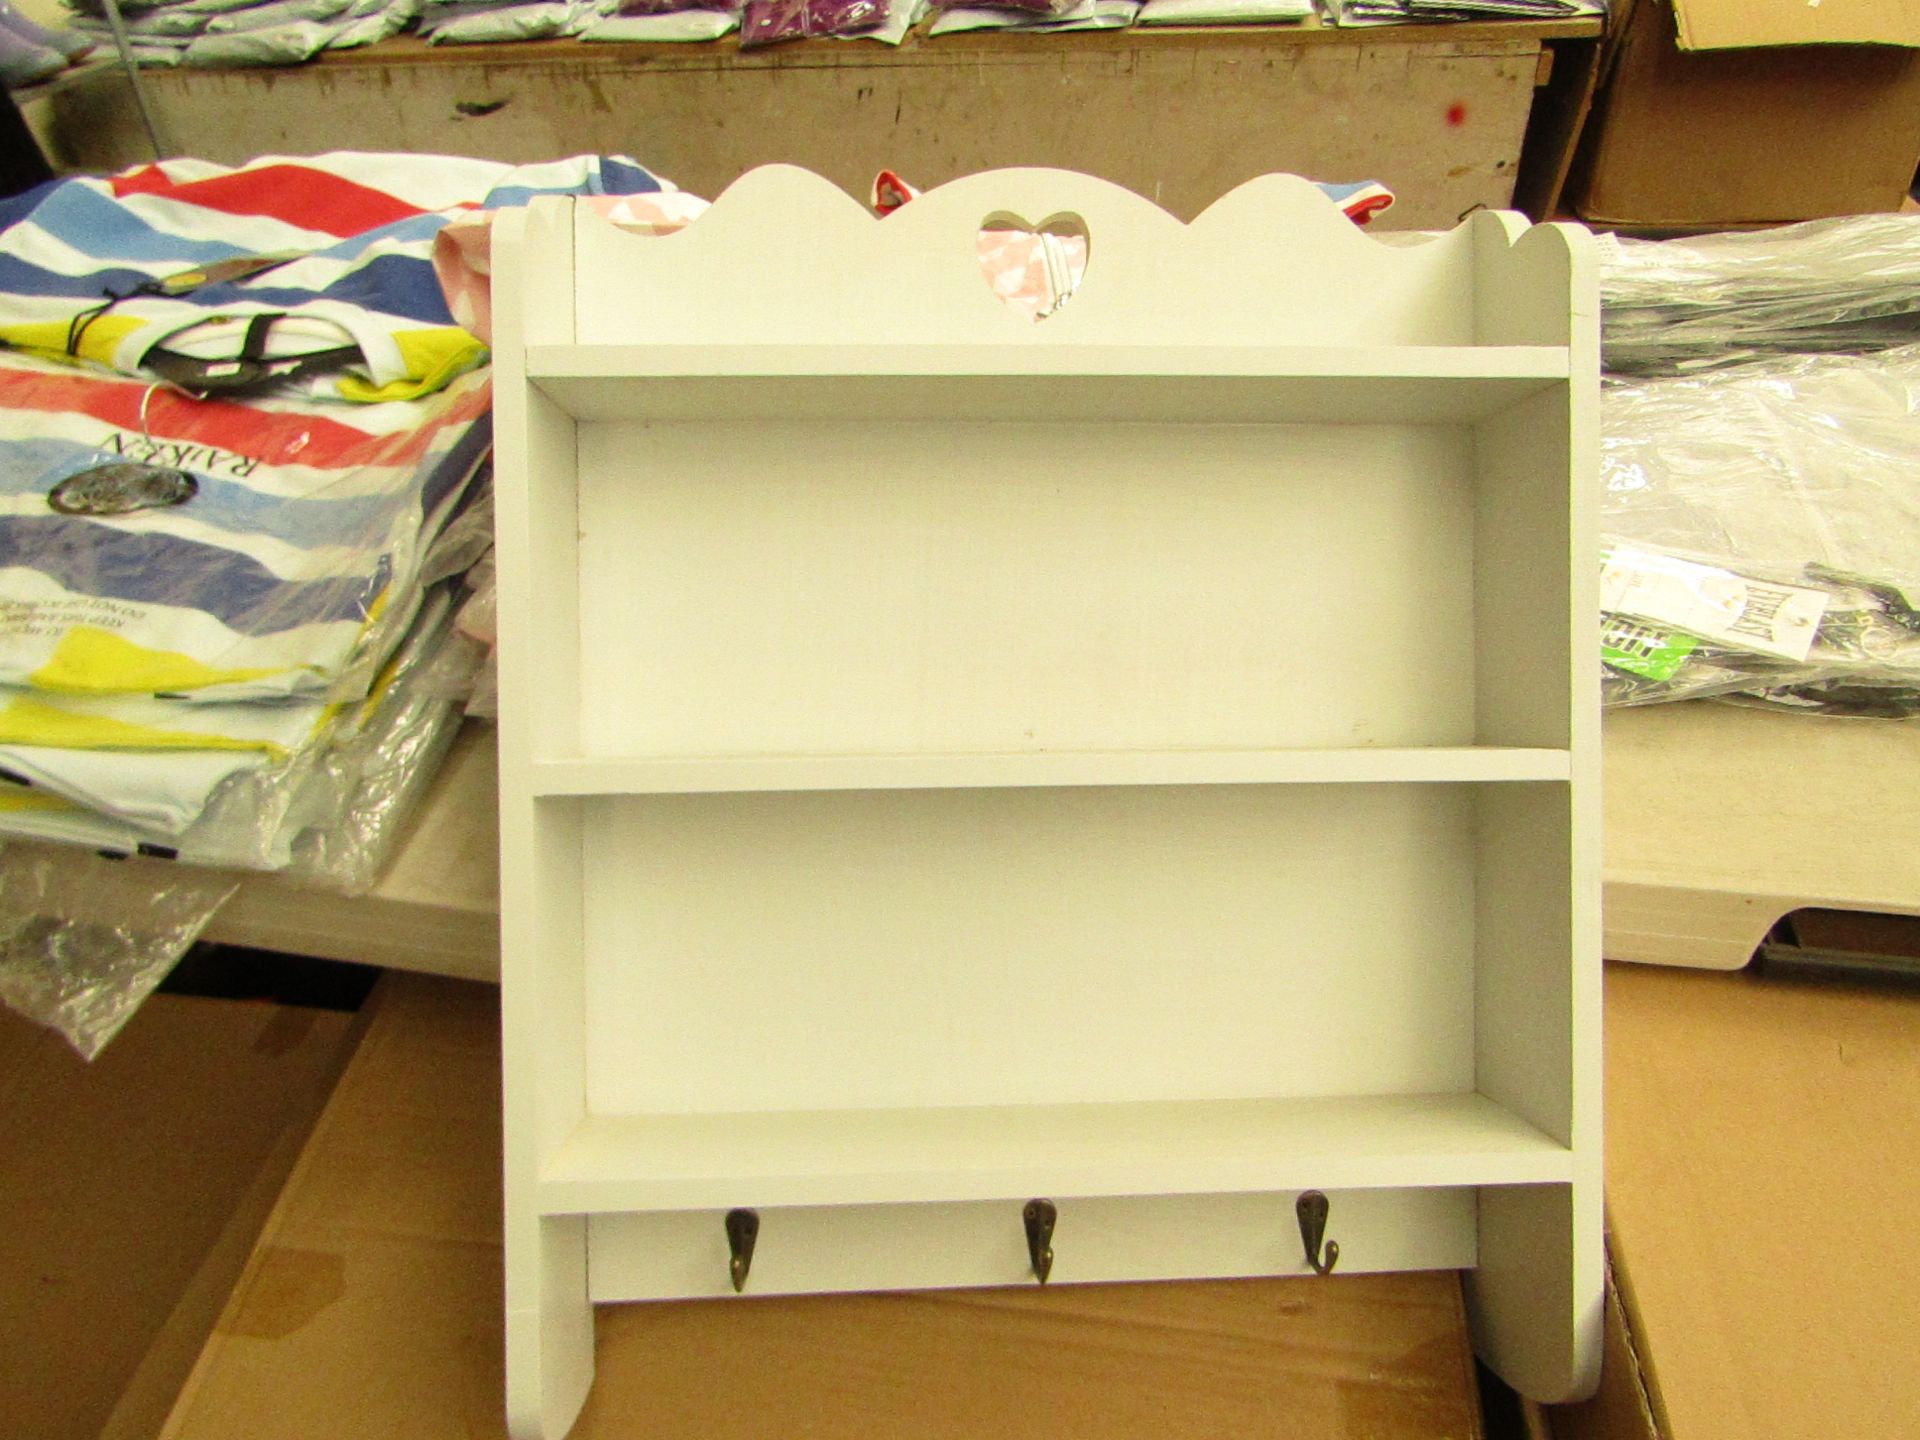 Flatpack 3 Tier Shelving Unit with 3 Hooks. New & Boxed. See image